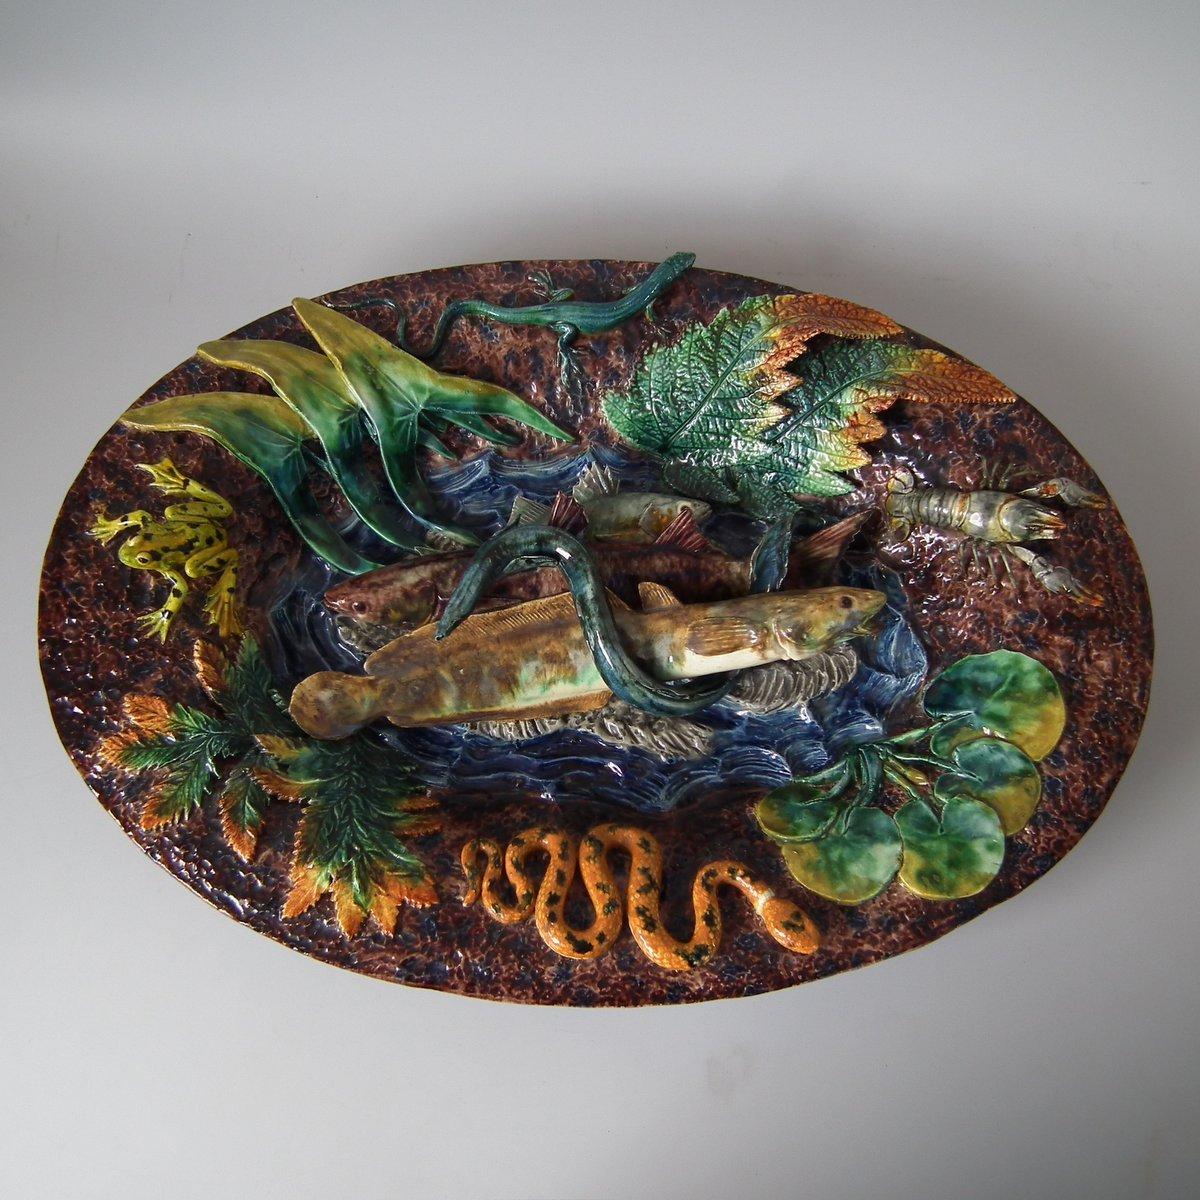 Thomas Sergent French Palissy Majolica wall platter which features three fish, an eel, a snake, a lizard, a crayfish and a frog. Colouration: brown, green, orange, are predominant. The piece bears maker's marks for the Thomas Sergent pottery.